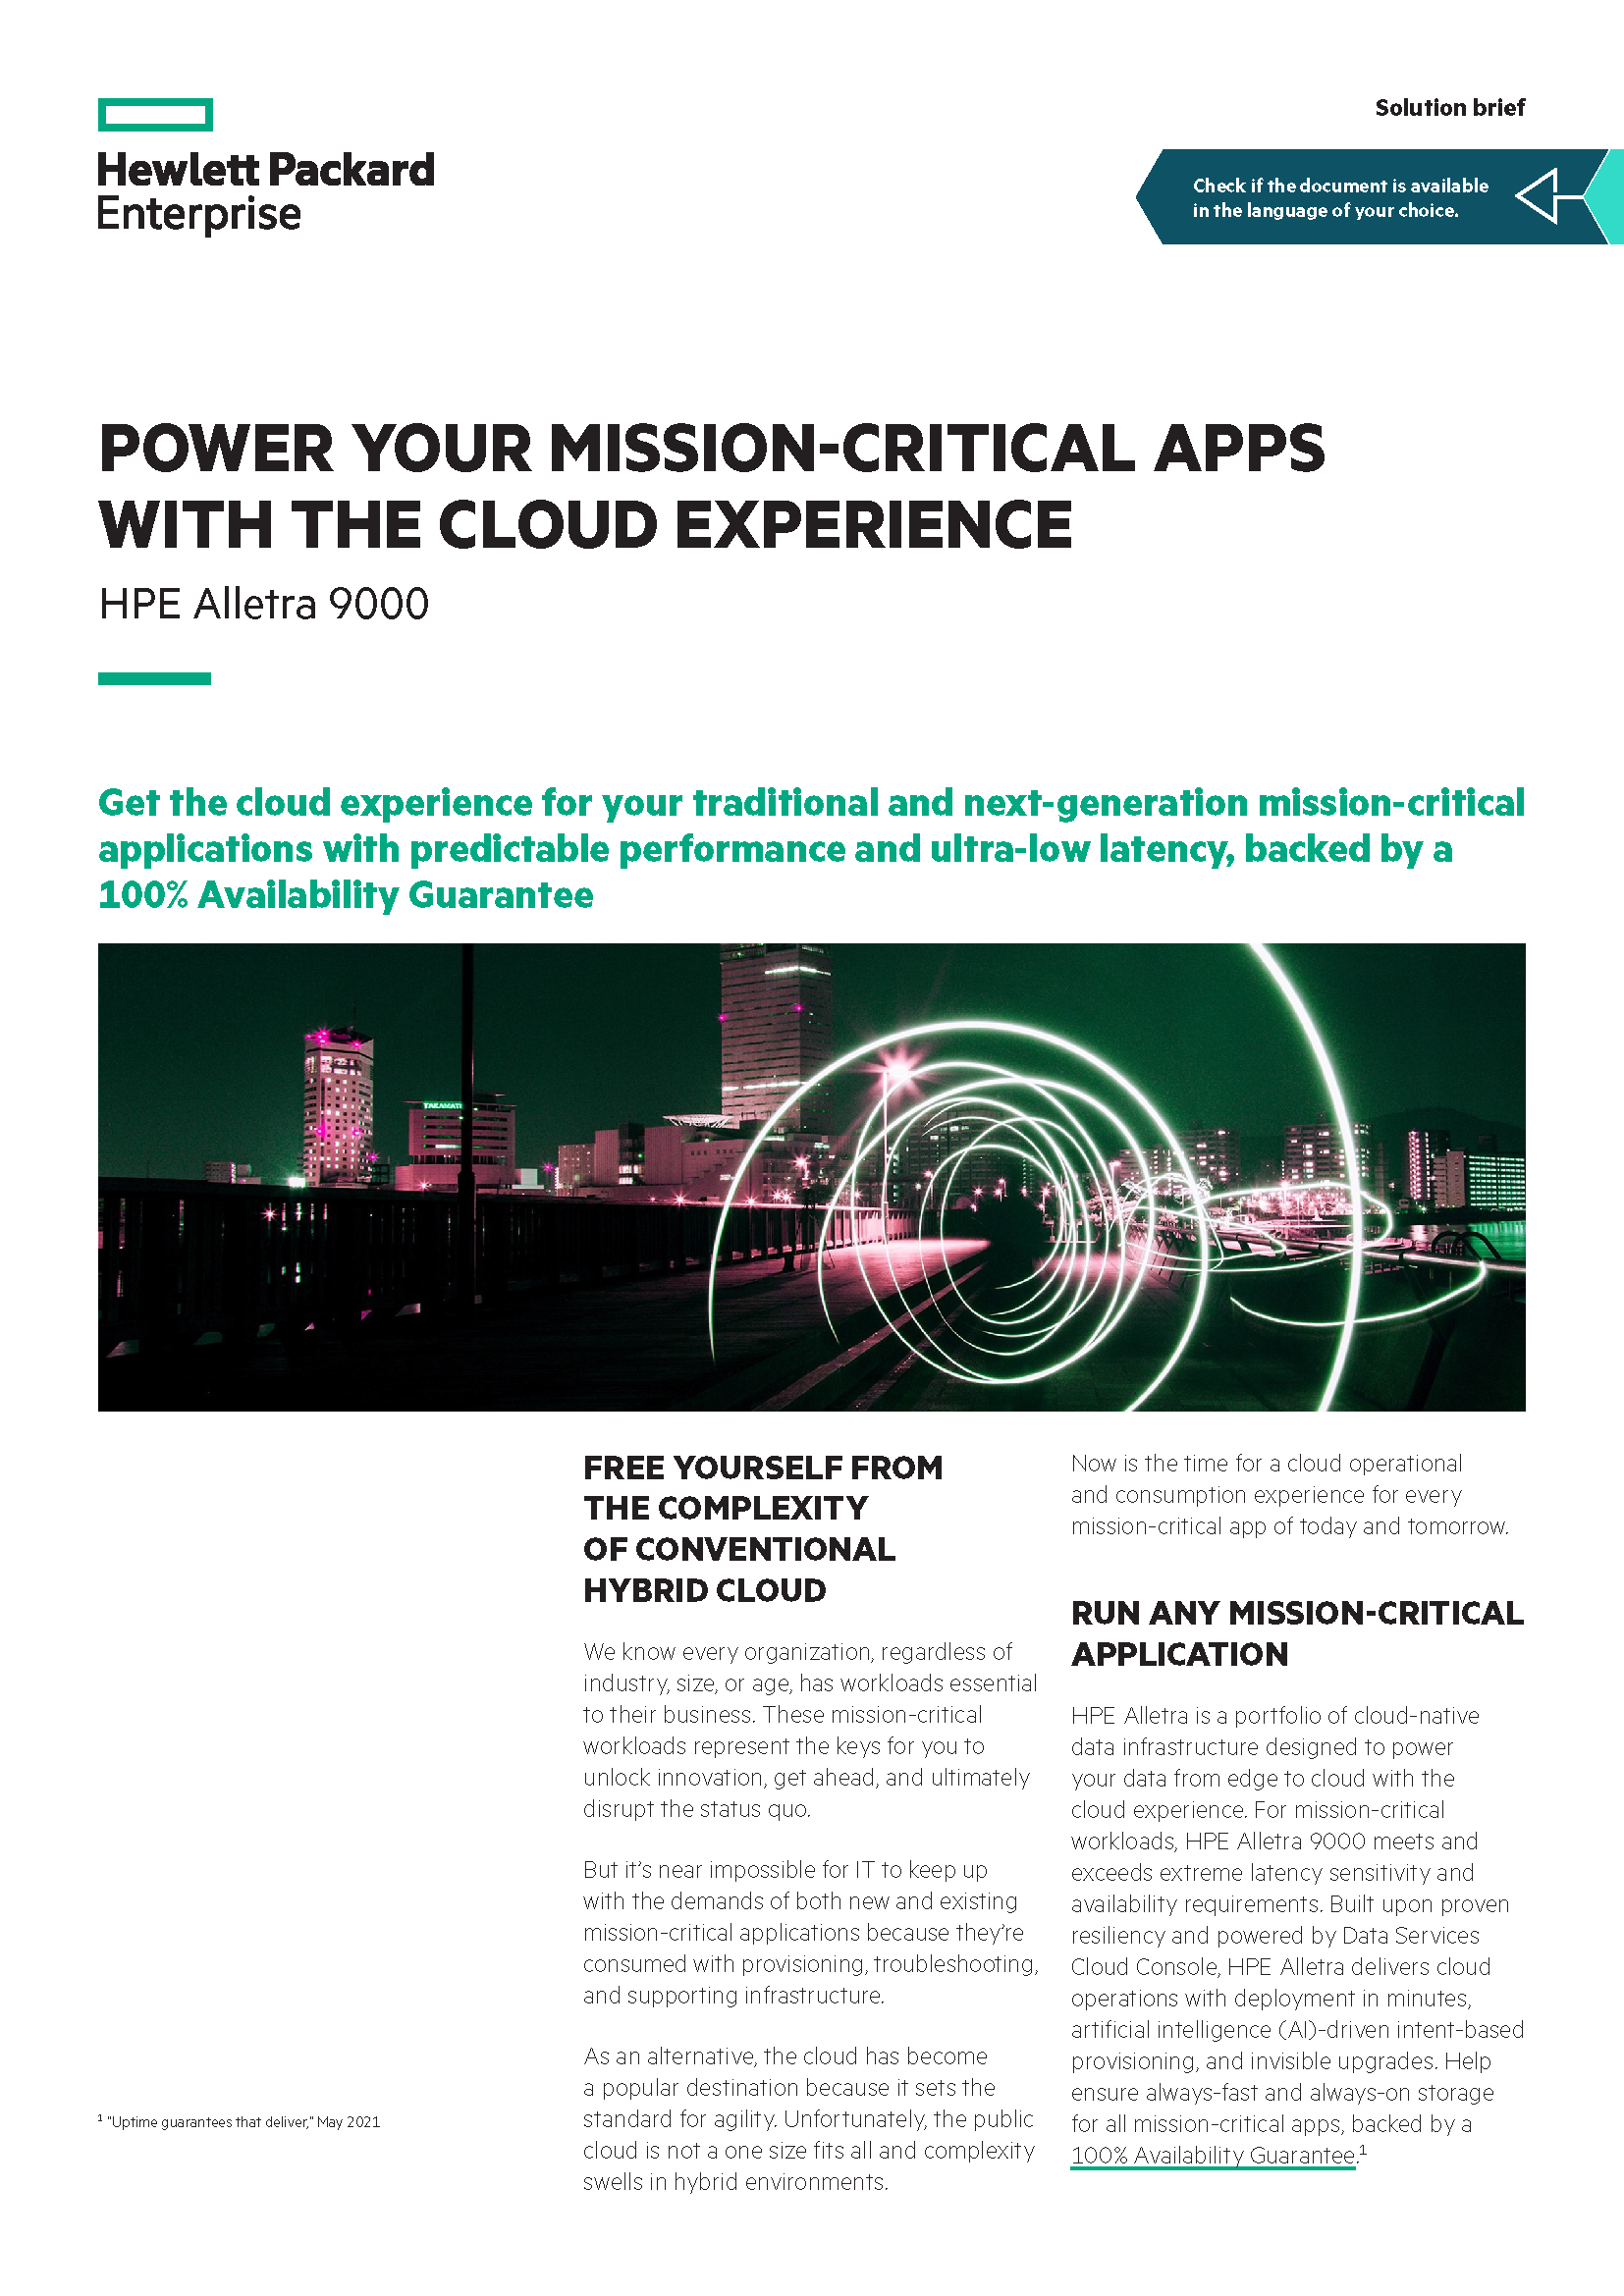 Carousel_8.1__-_Power_your_mission-critical_apps_with_the_cloud_experience_â€“_HPE_Alletra_9000_solution_brief-a50003983enw_Page_1